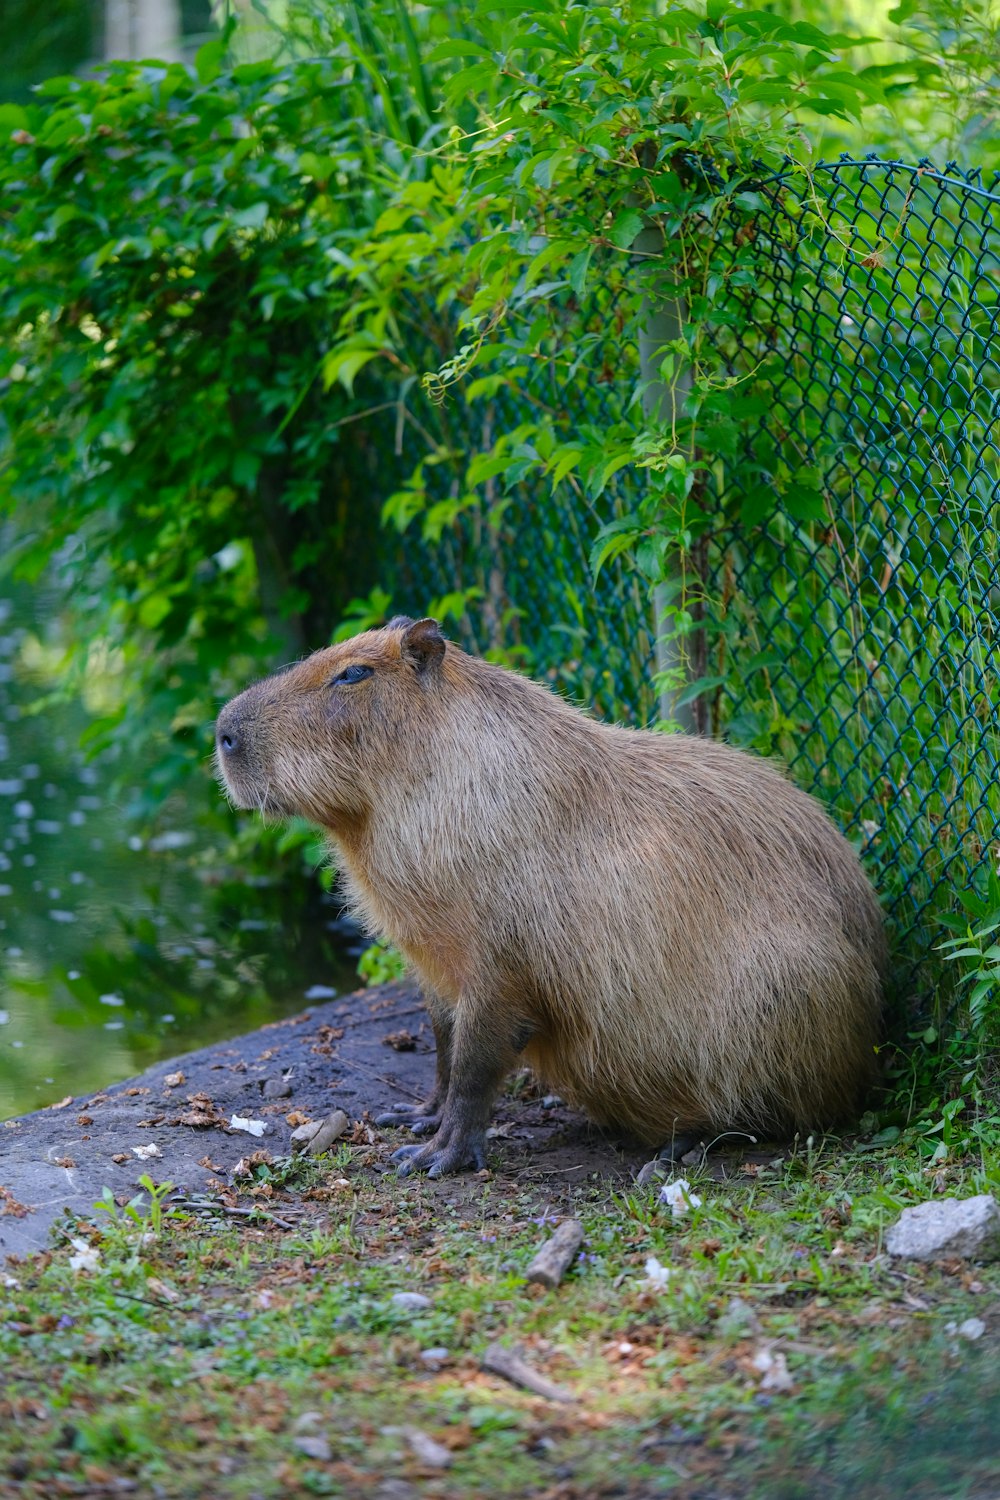 a capybara sitting on the ground next to a fence